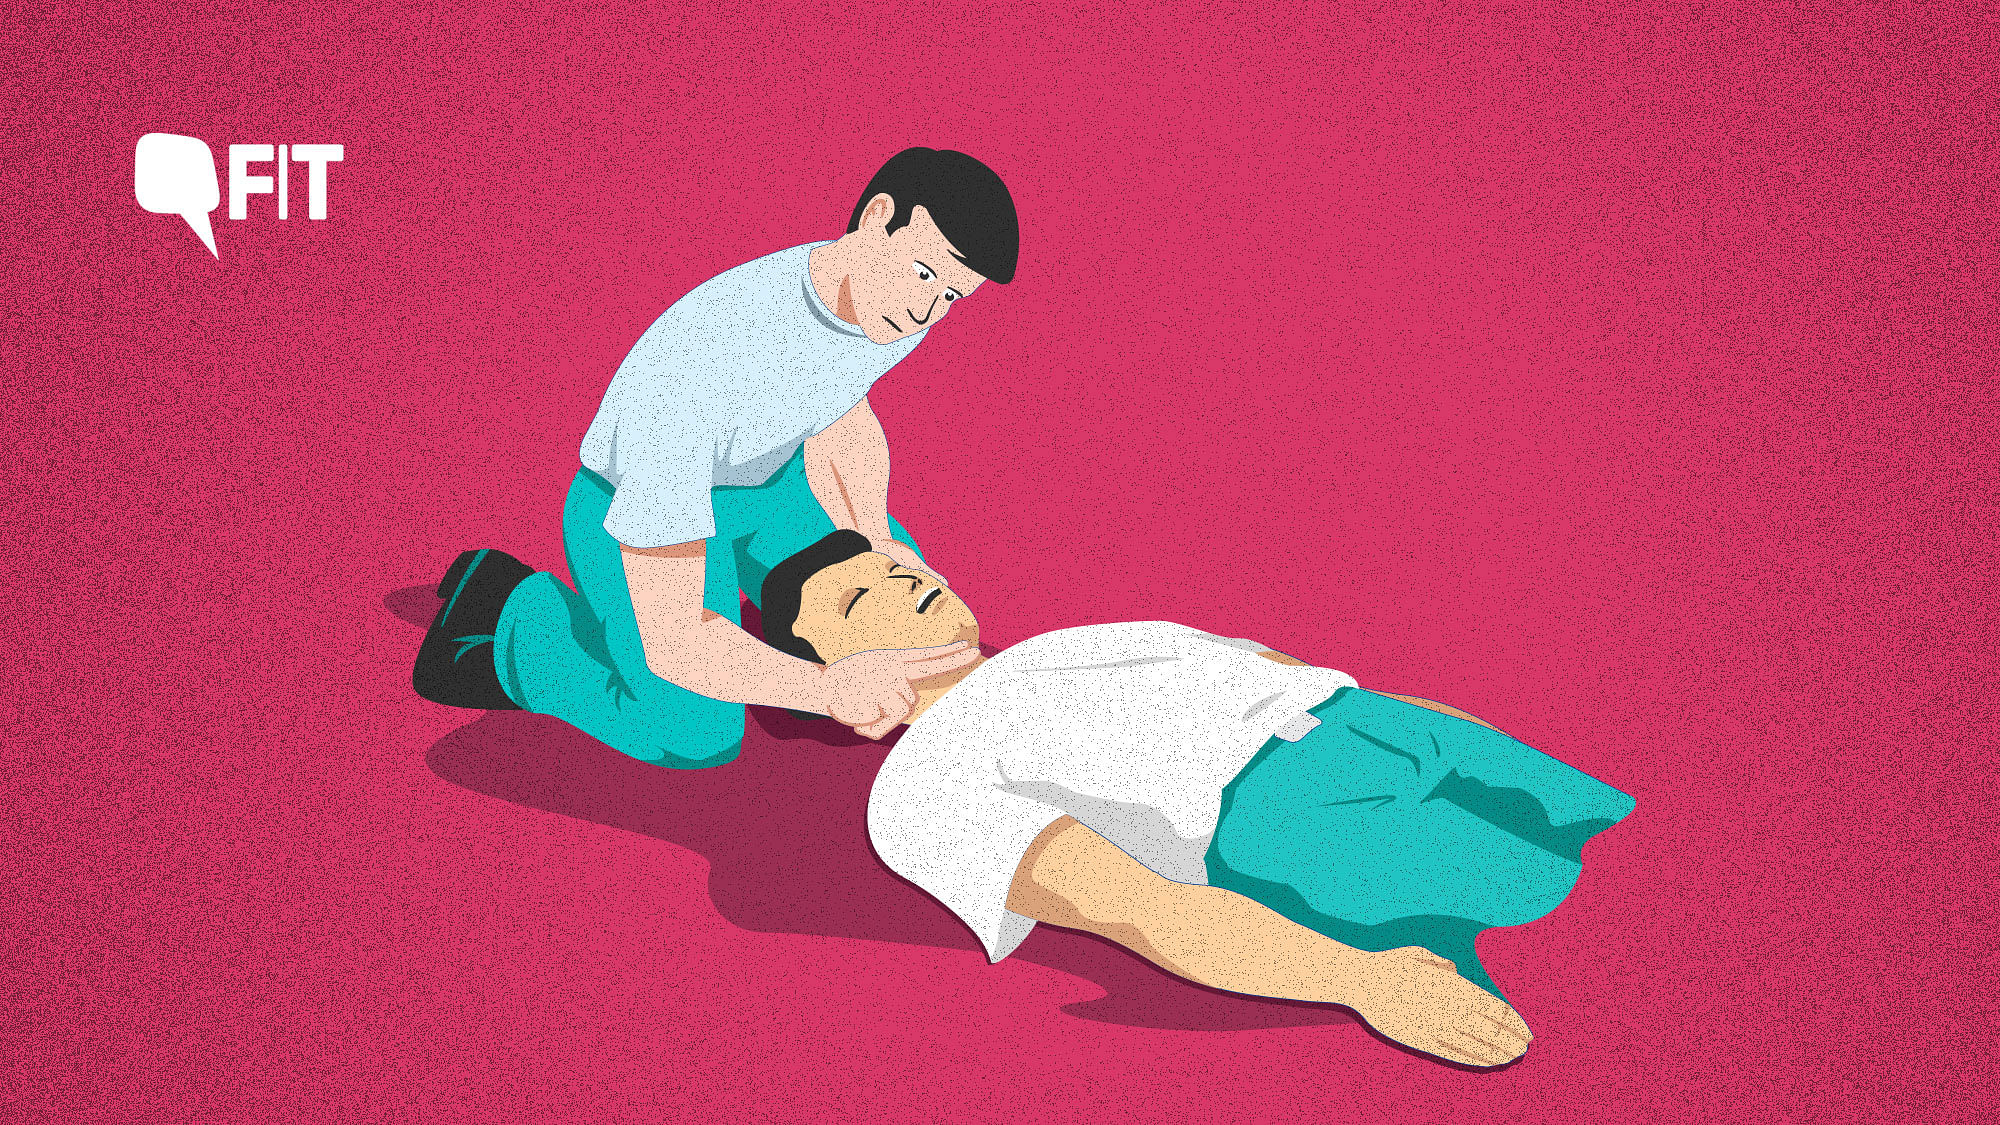 Here are a few common things you should keep in mind if someone collapses in front of you.